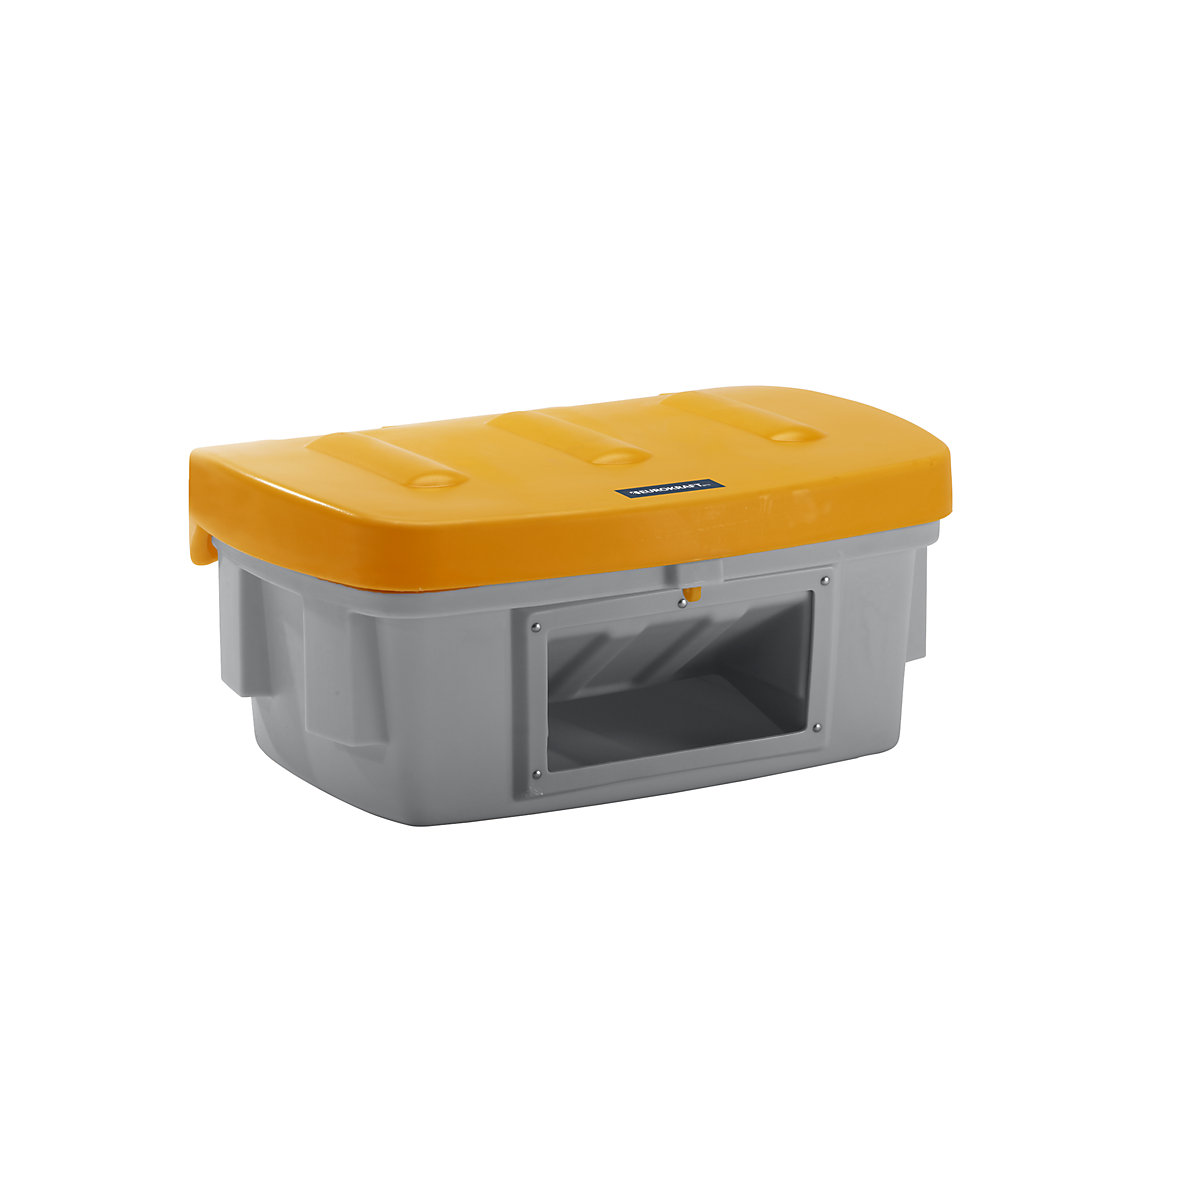 Universal / grit container – eurokraft pro, with dispenser opening, 100 l, orange lid-5